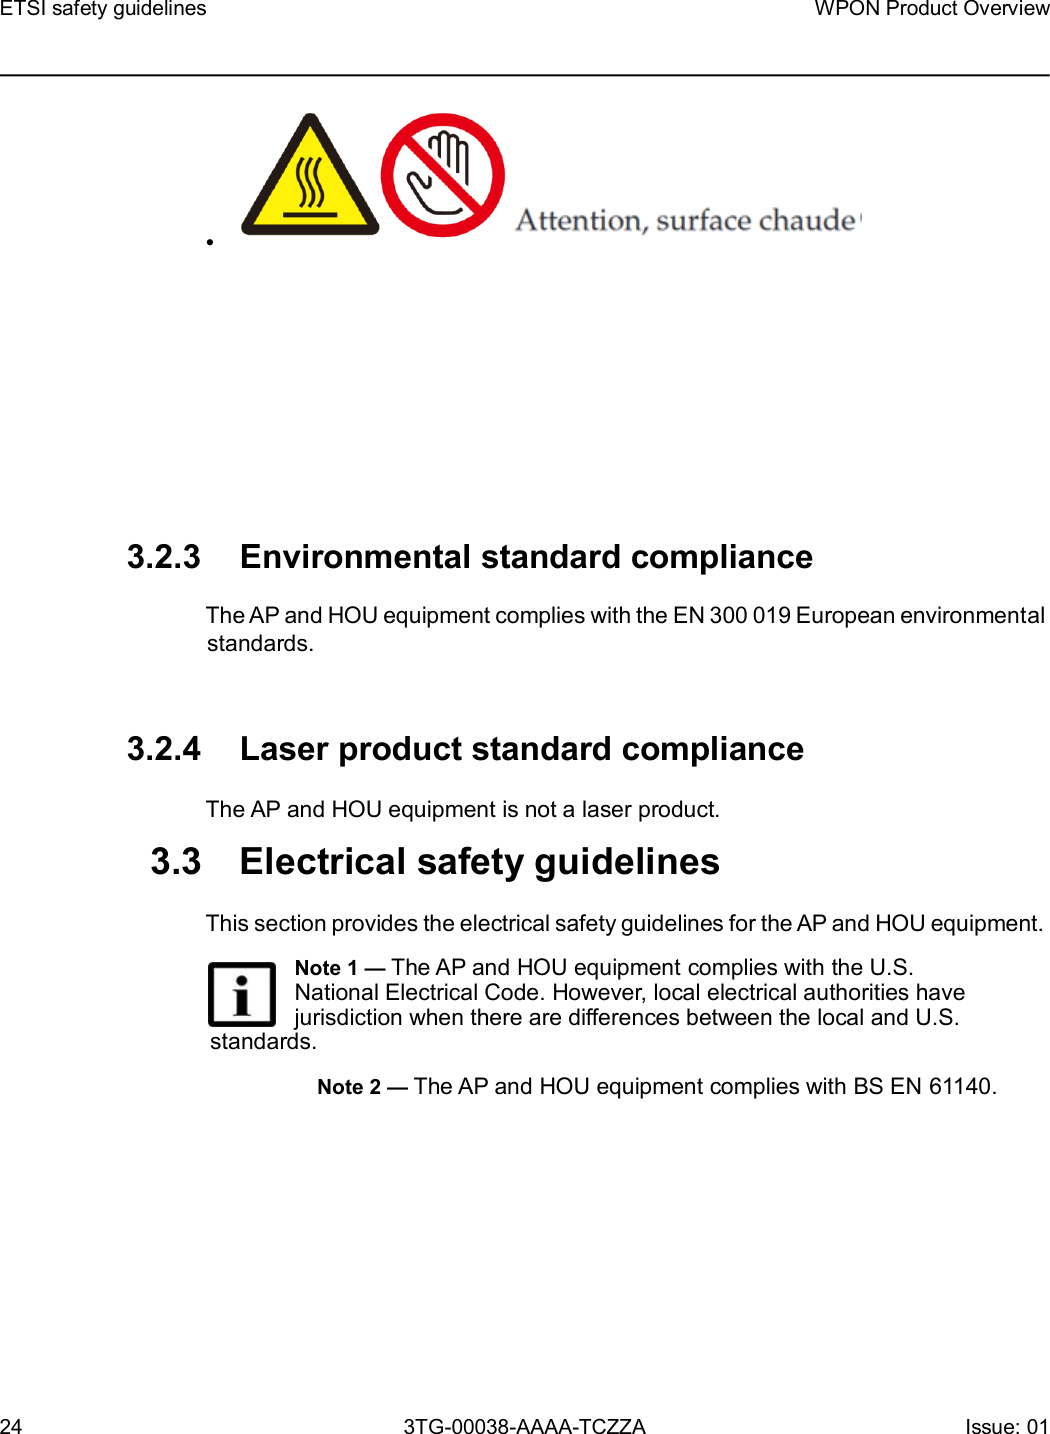 Page 24 of Nokia Bell 7577WPONAPDC WPON User Manual WPON Product Overview